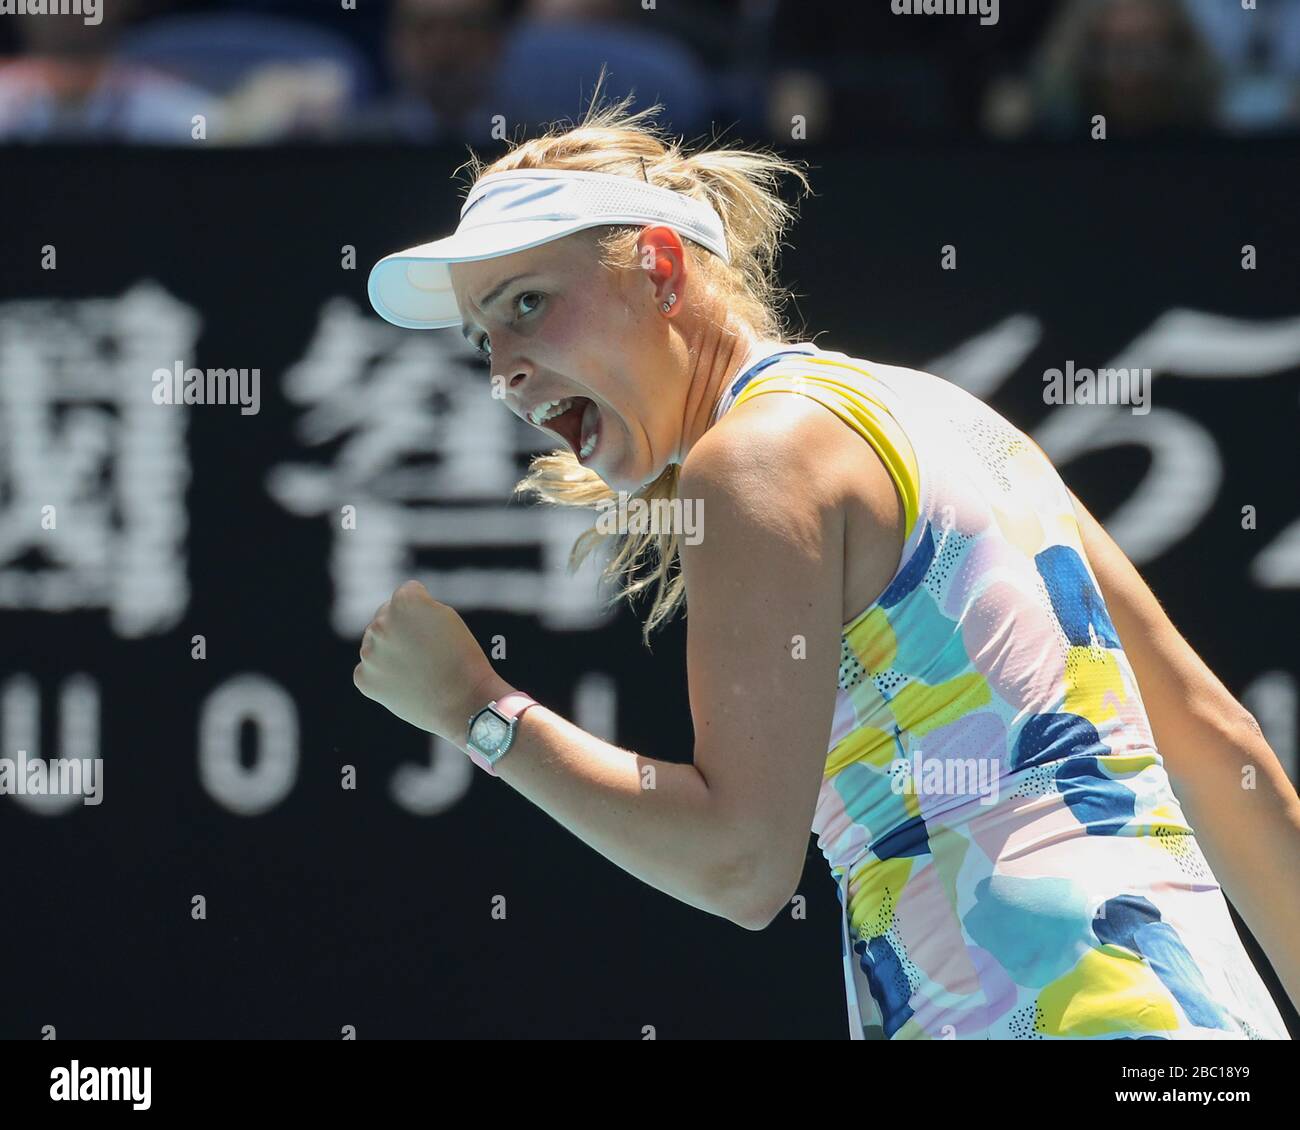 Croatian tennis player Donna Vekic making a fist and cheering during  women's singles match in Australian Open 2020 Tennis Tournament, Melbourne  Park Stock Photo - Alamy